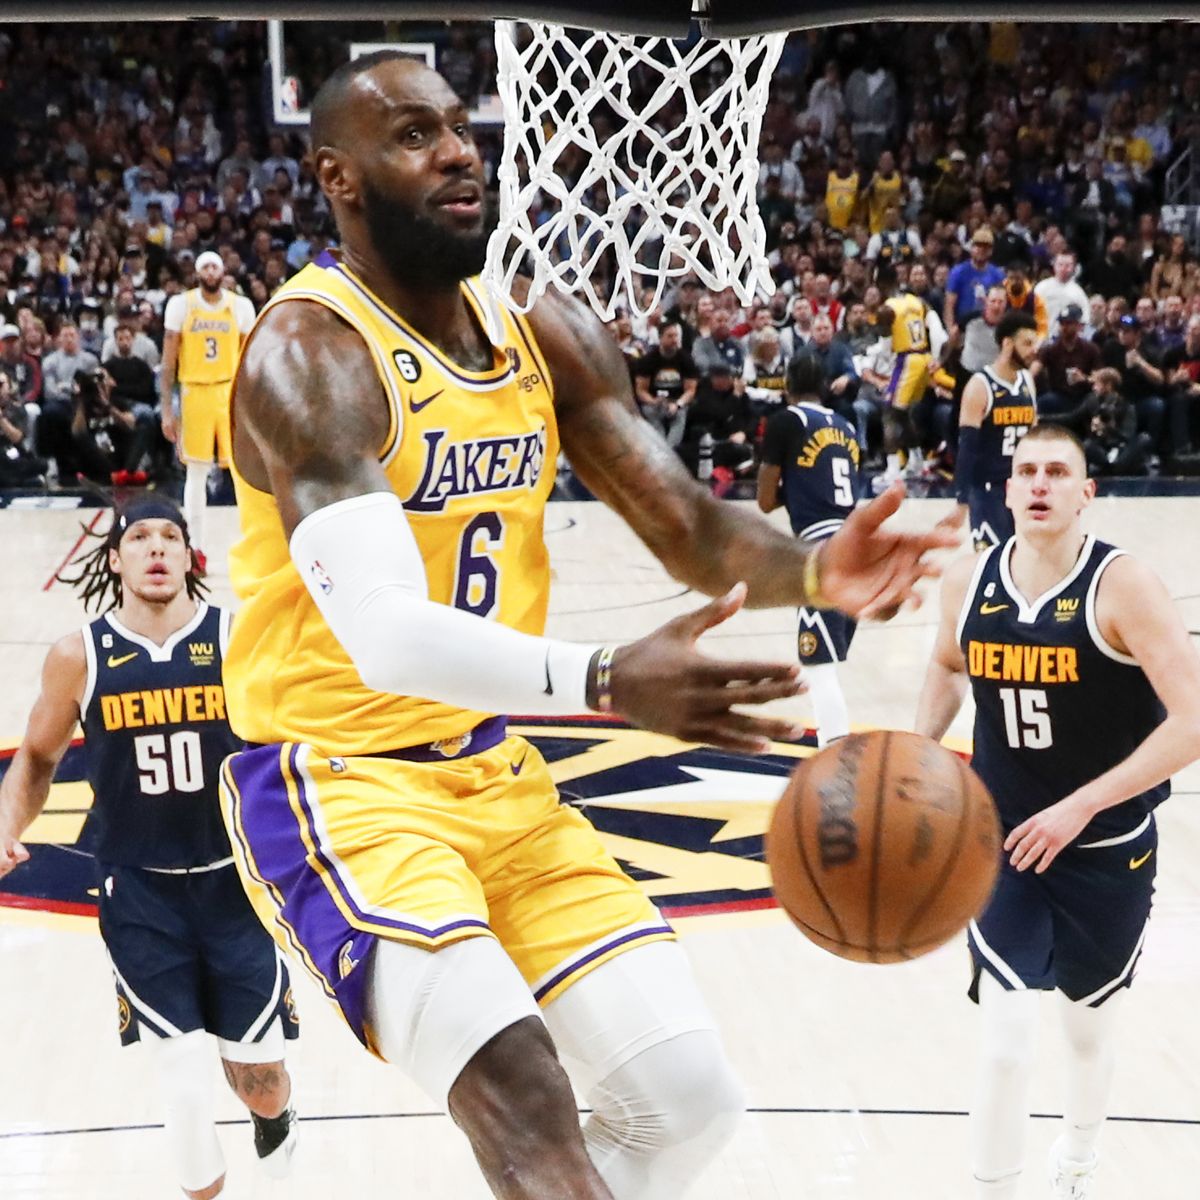 LeBron James, Lakers still lead NBA in merch sales - Silver Screen and Roll